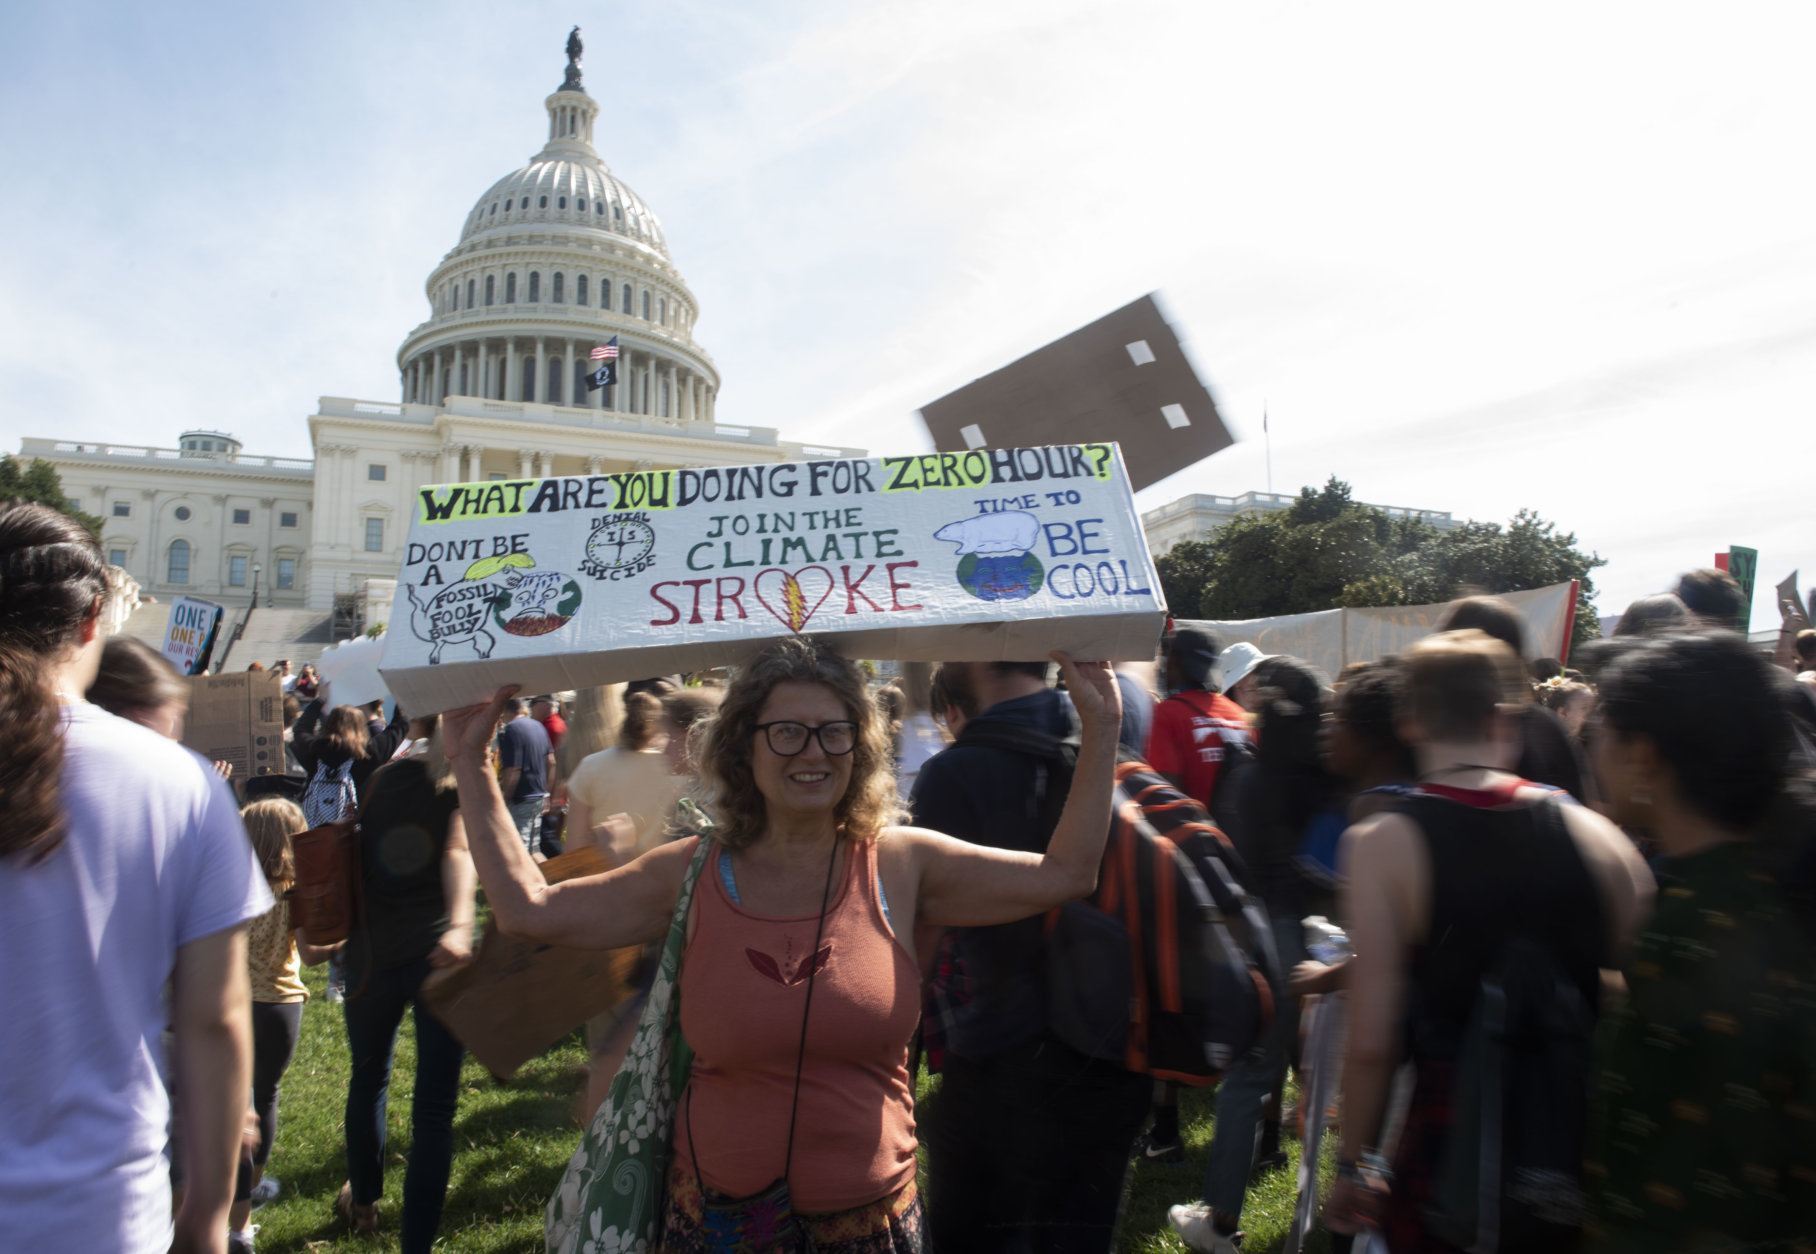 Angela Flynn, of Washington, holds a sign as she demonstrate at the march to the U.S. Capitol during the Climate Strike Friday, Sept. 20, 2019, in Washington. (AP Photo/Kevin Wolf)